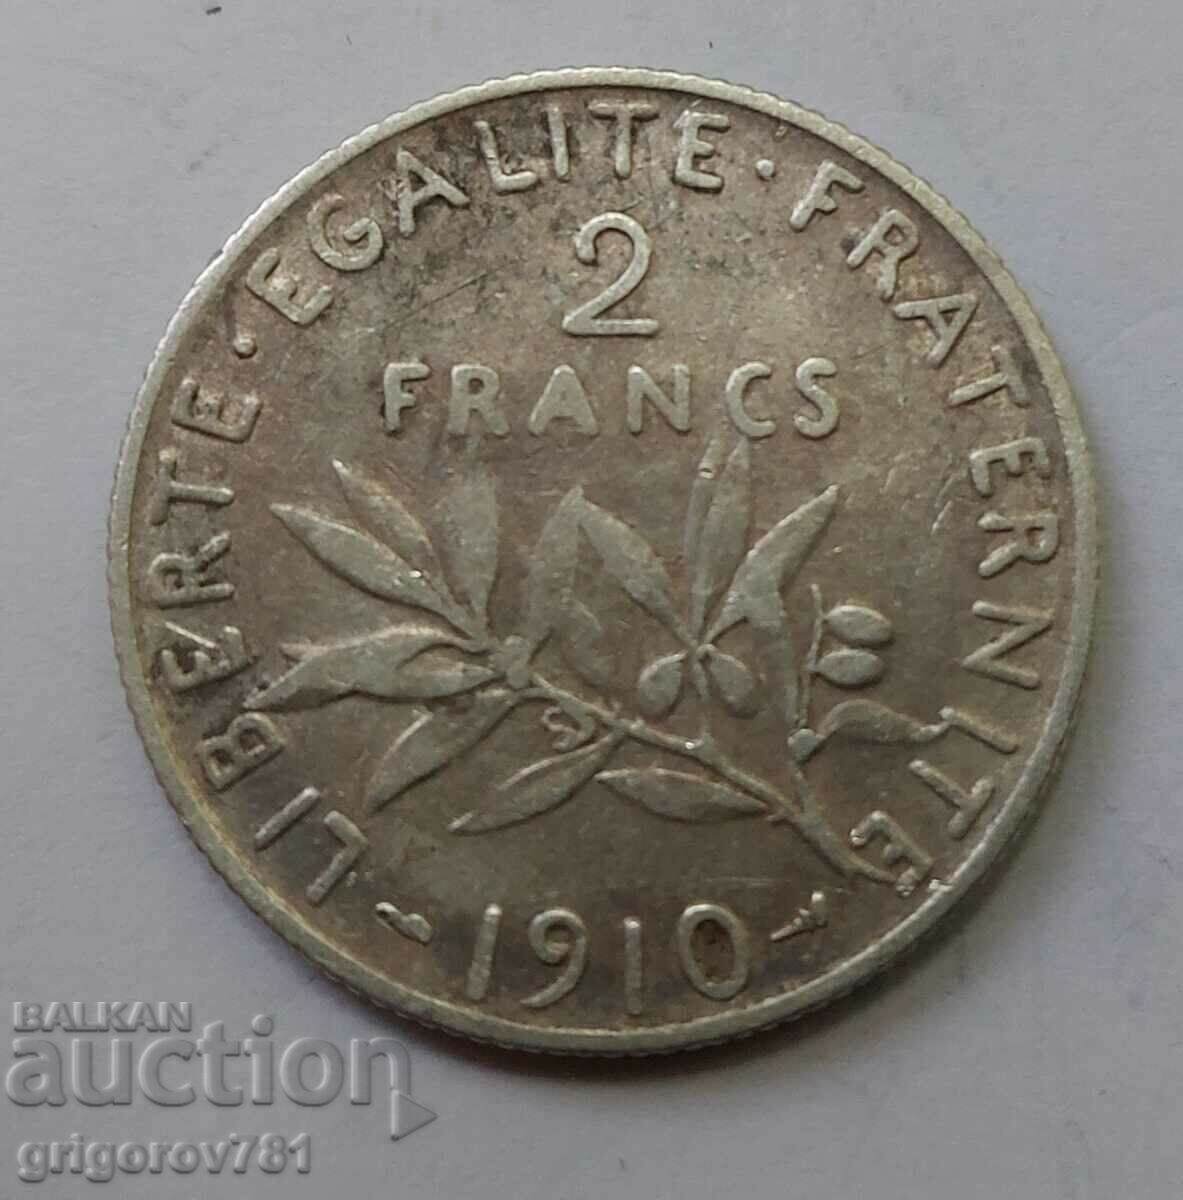 2 Francs Silver France 1910 - Silver Coin #113